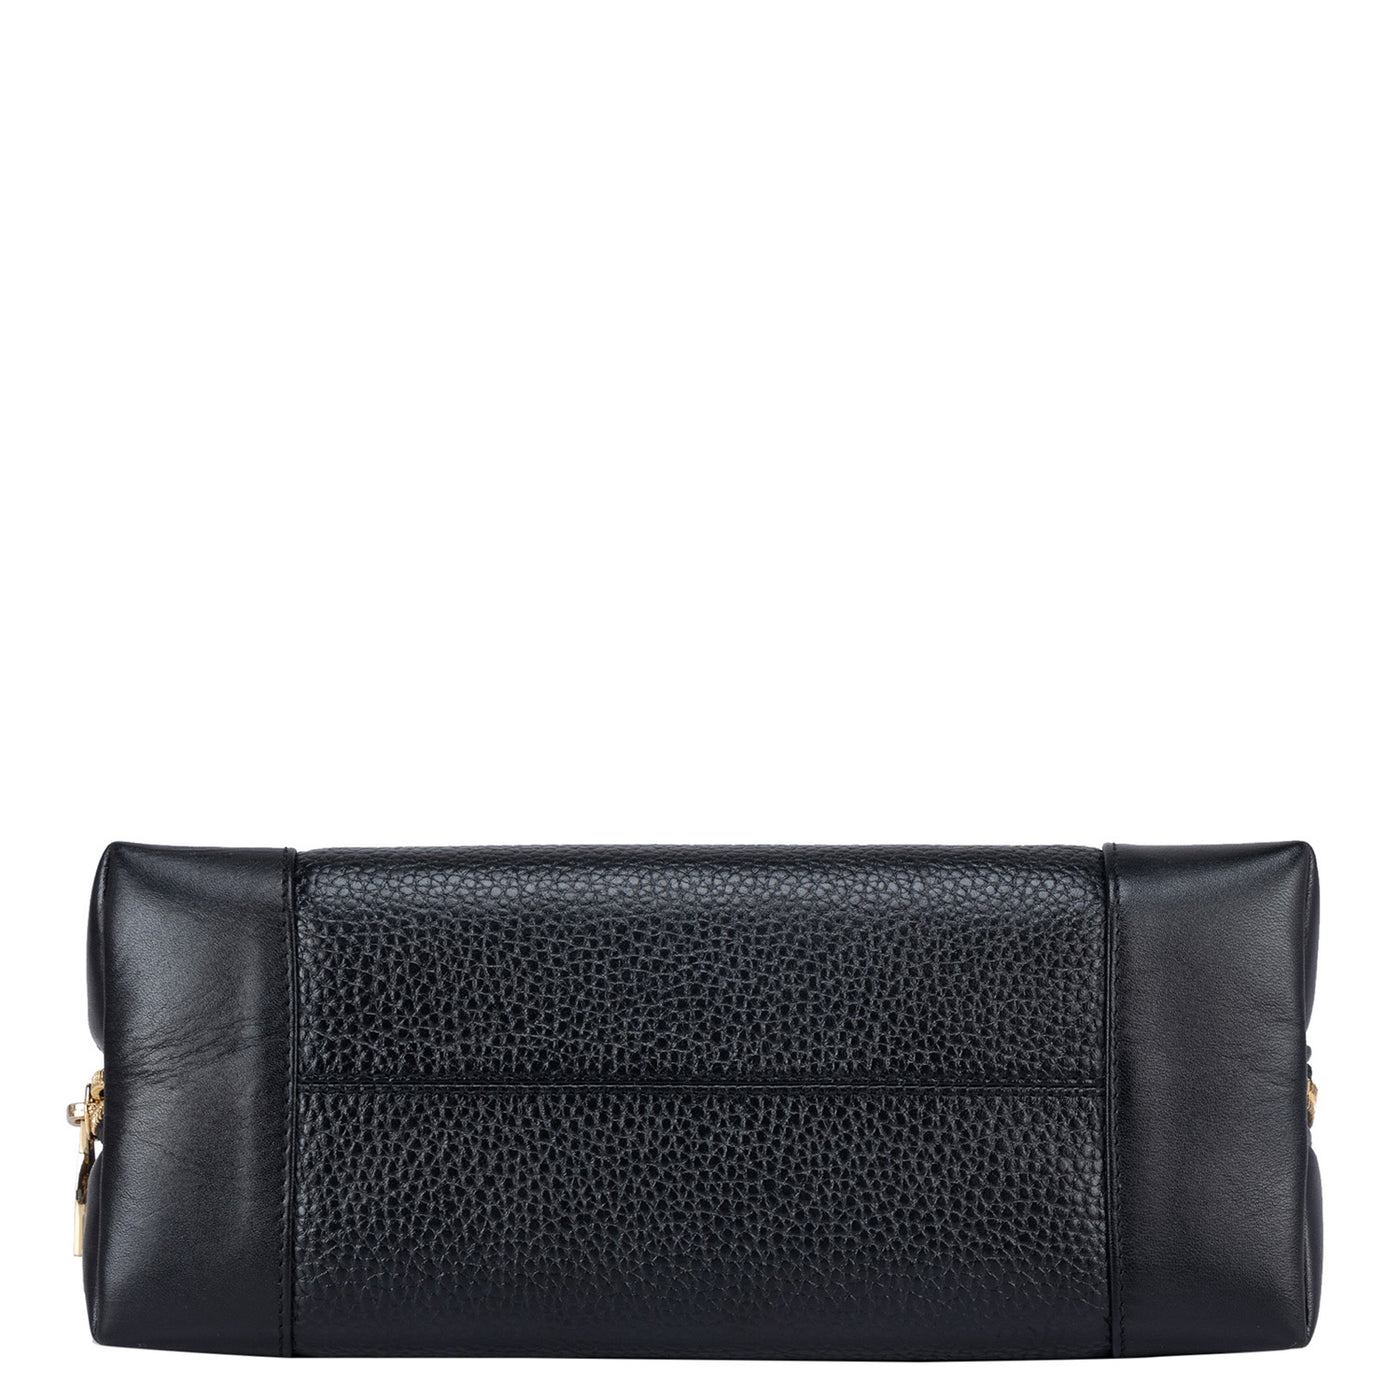 Wax Leather Multi Pouch - Black